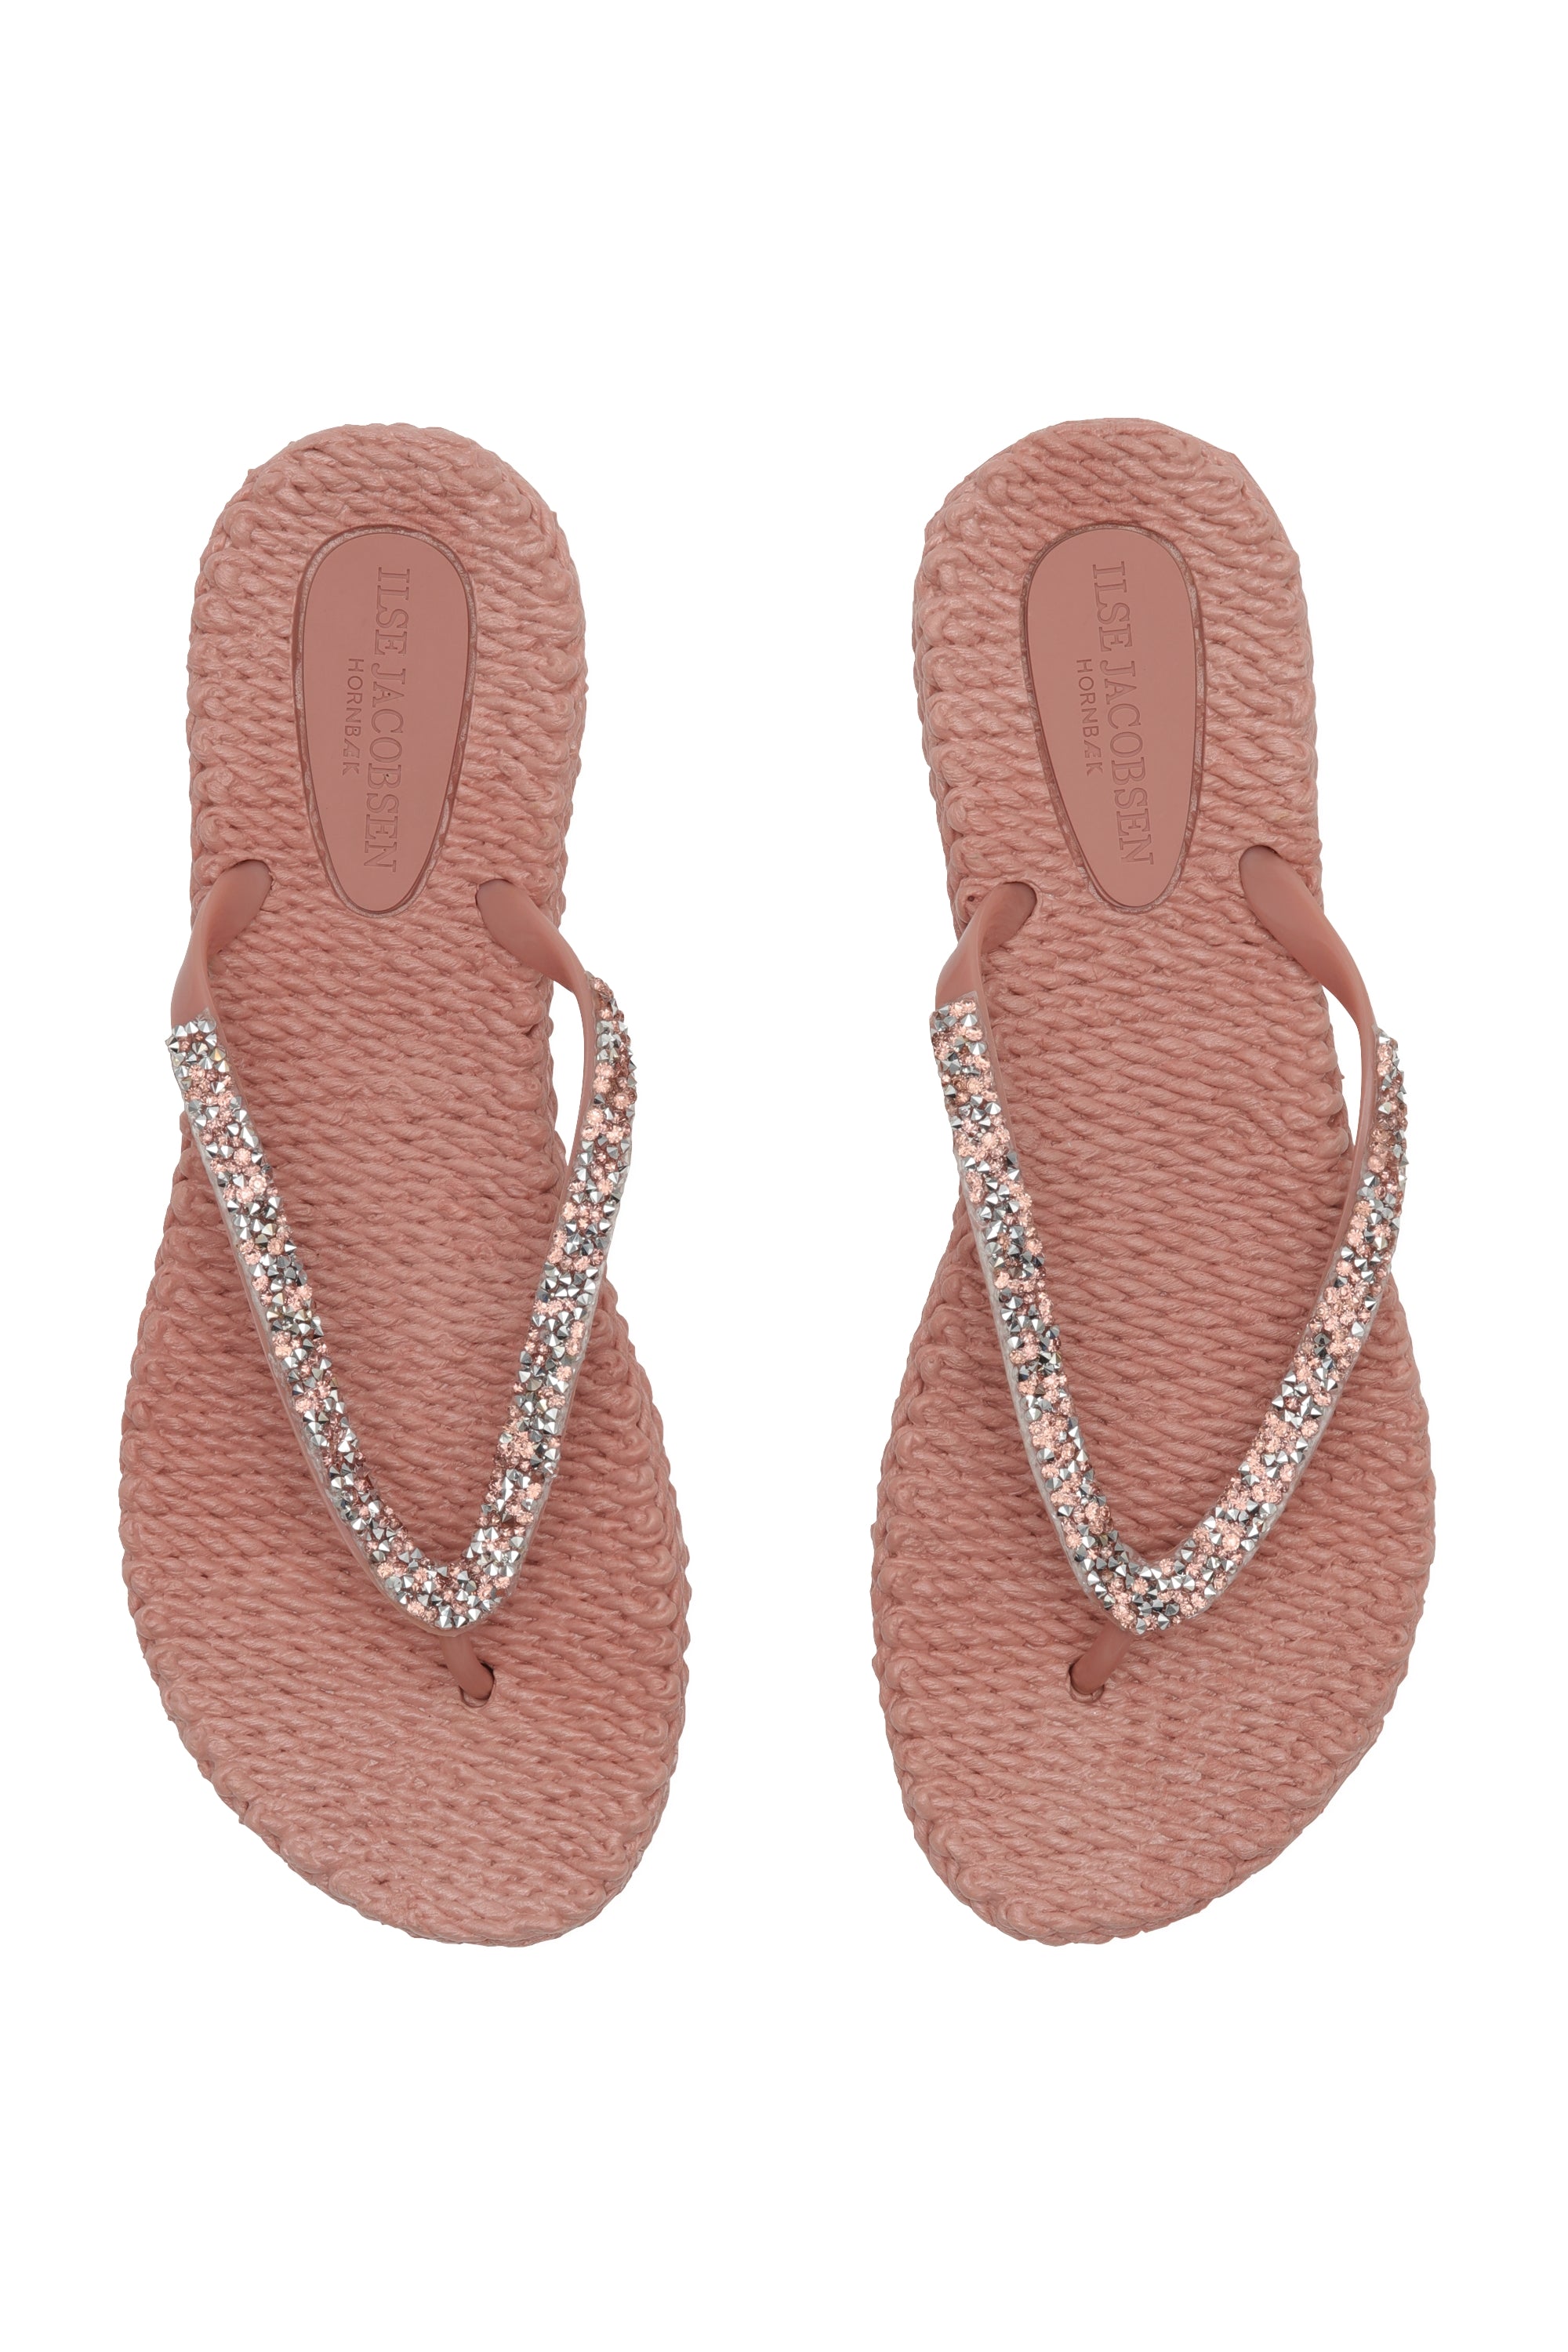 Flip Flop in color misty rose with glitter strips by Ilse Jacobsen